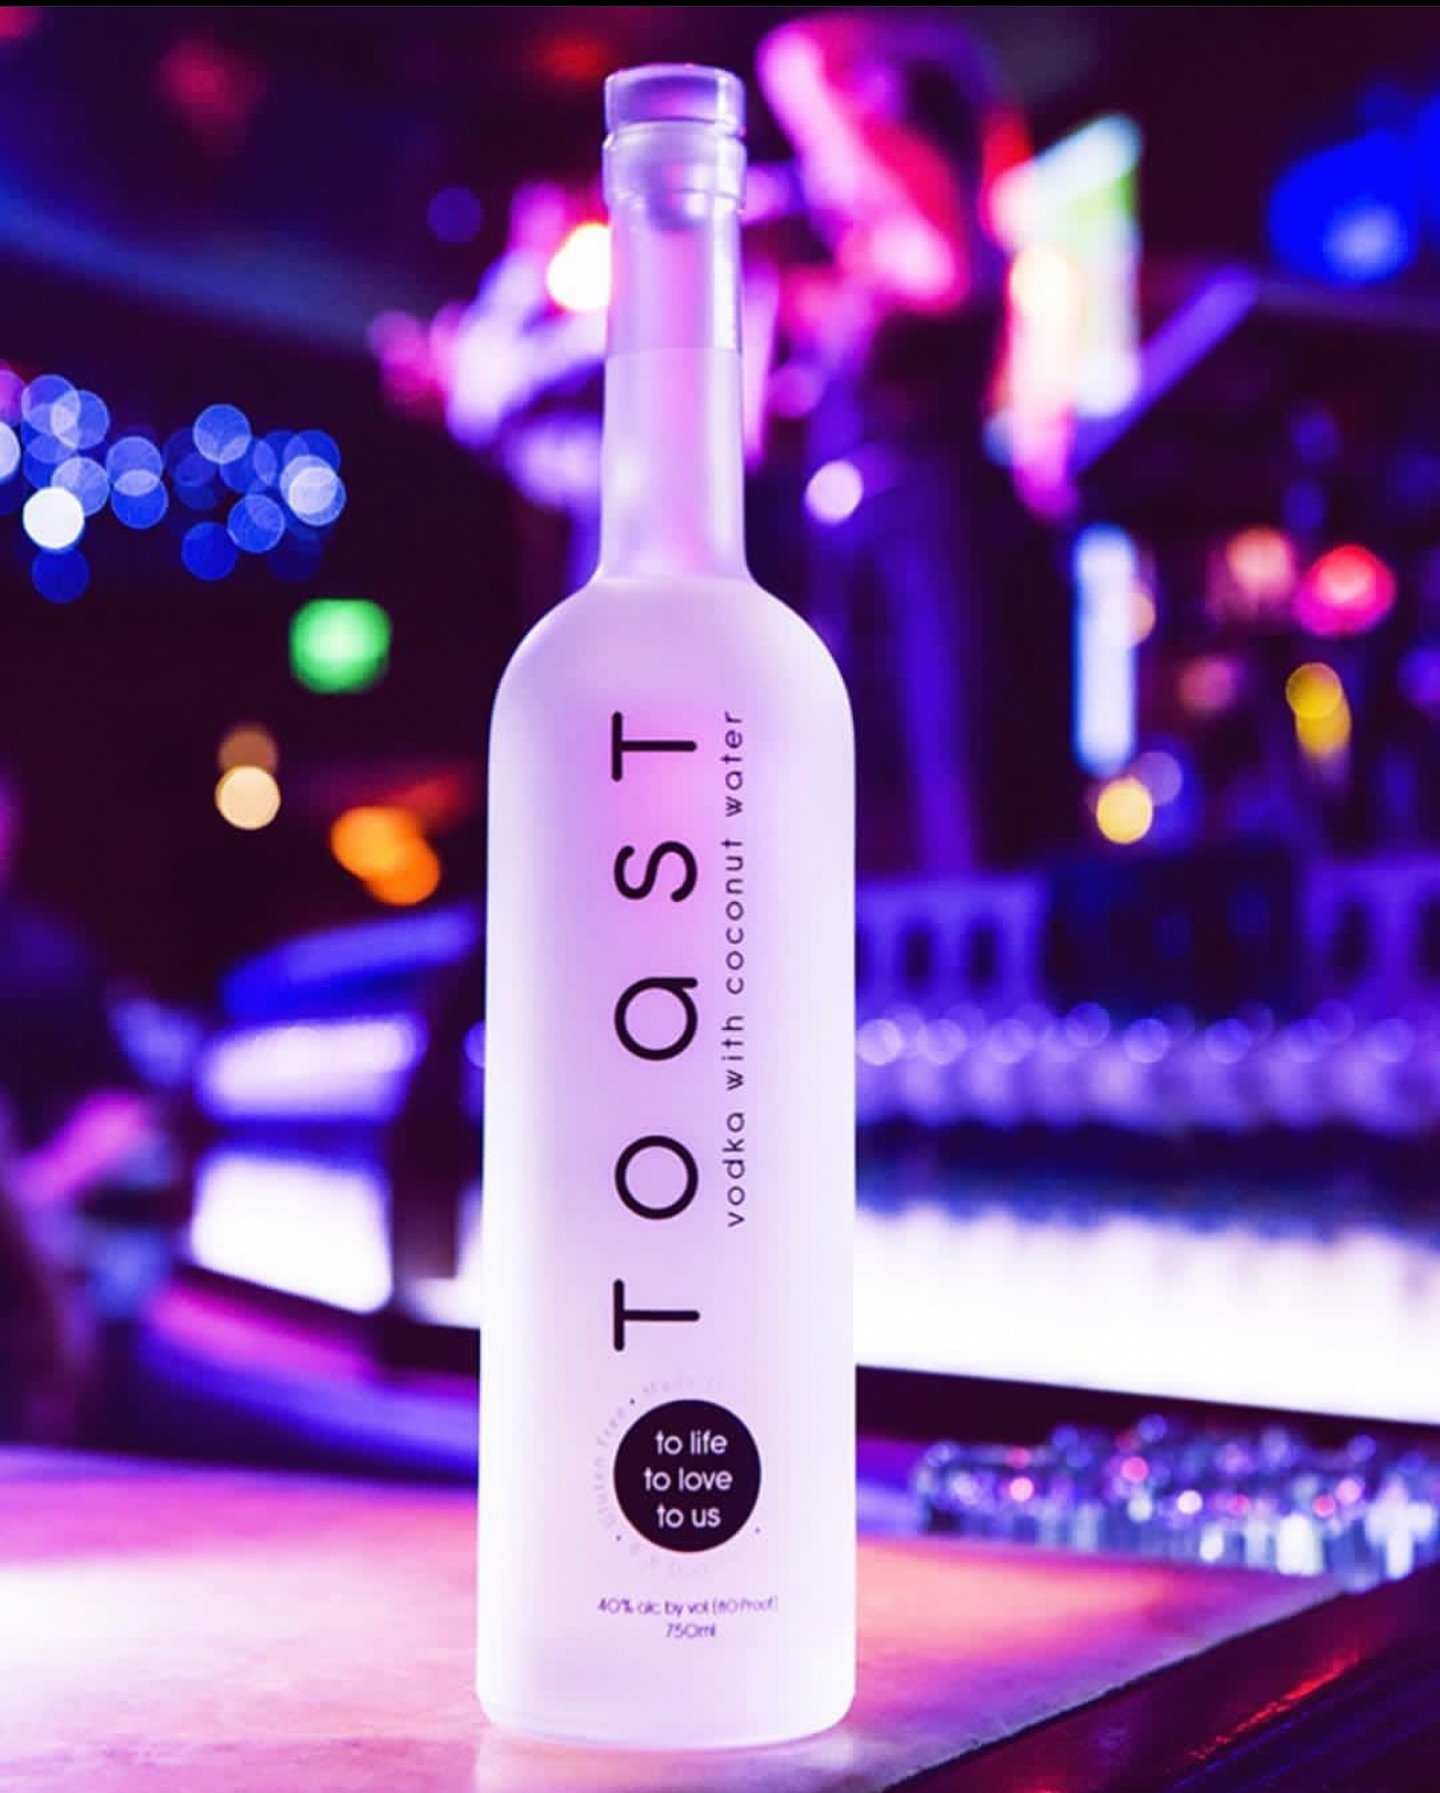 Friday night plans? We&rsquo;re keeping it smooth with Toast Vodka. Cheers to the start of the weekend! 🍸✨ 

#ToastToFriday #toastvodka #fridayvibes #explore